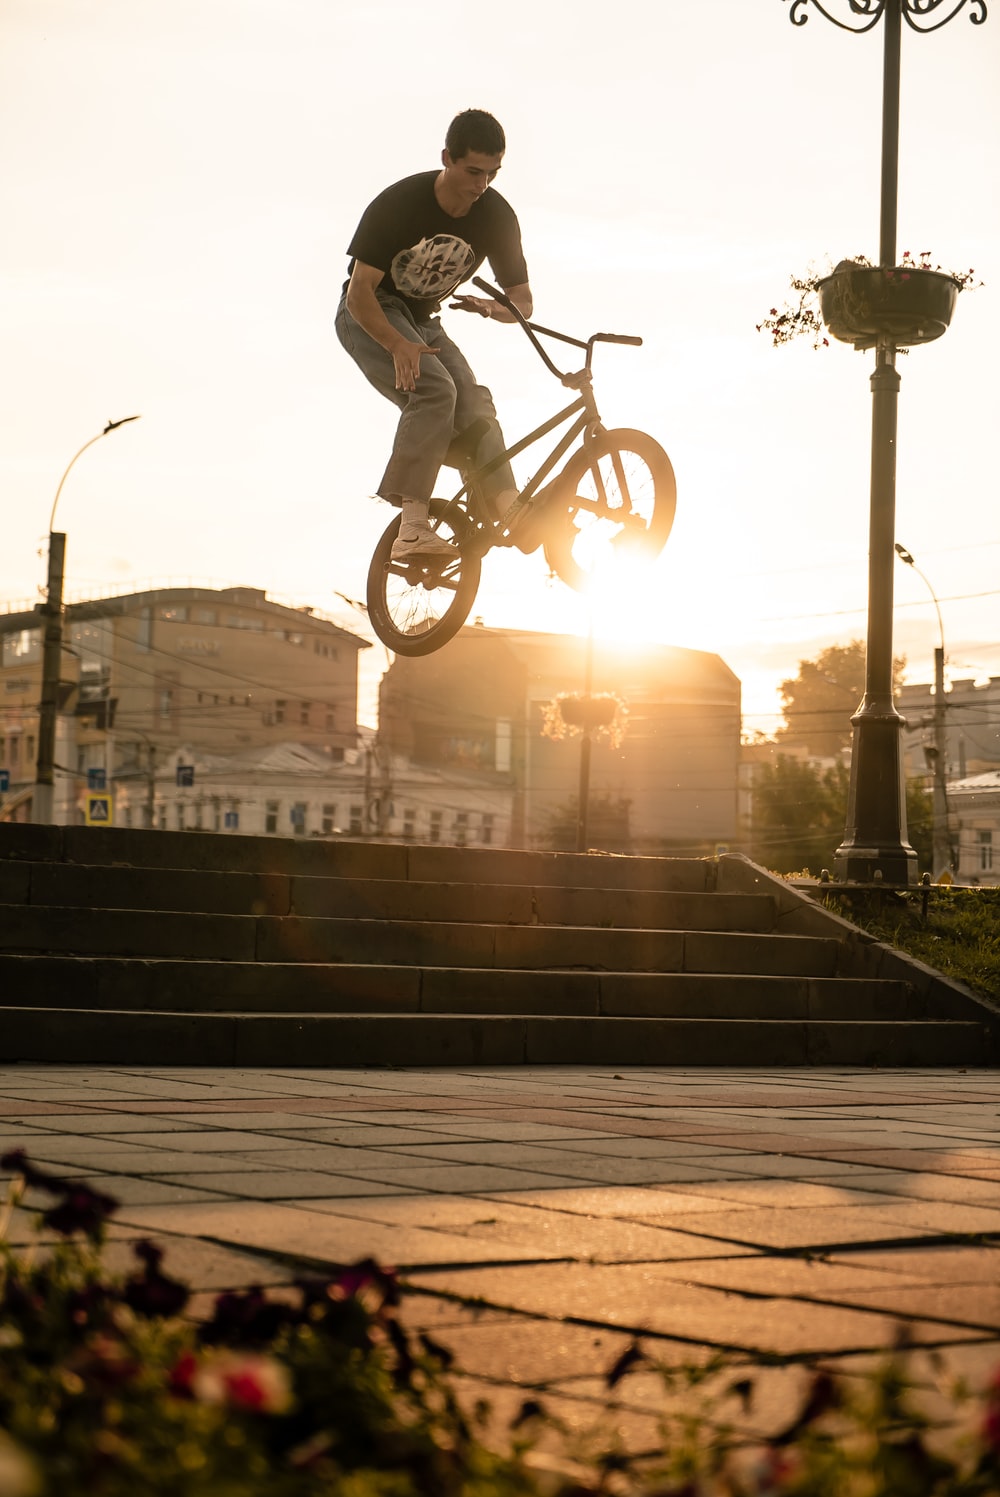 Bmx Trick Picture. Download Free Image